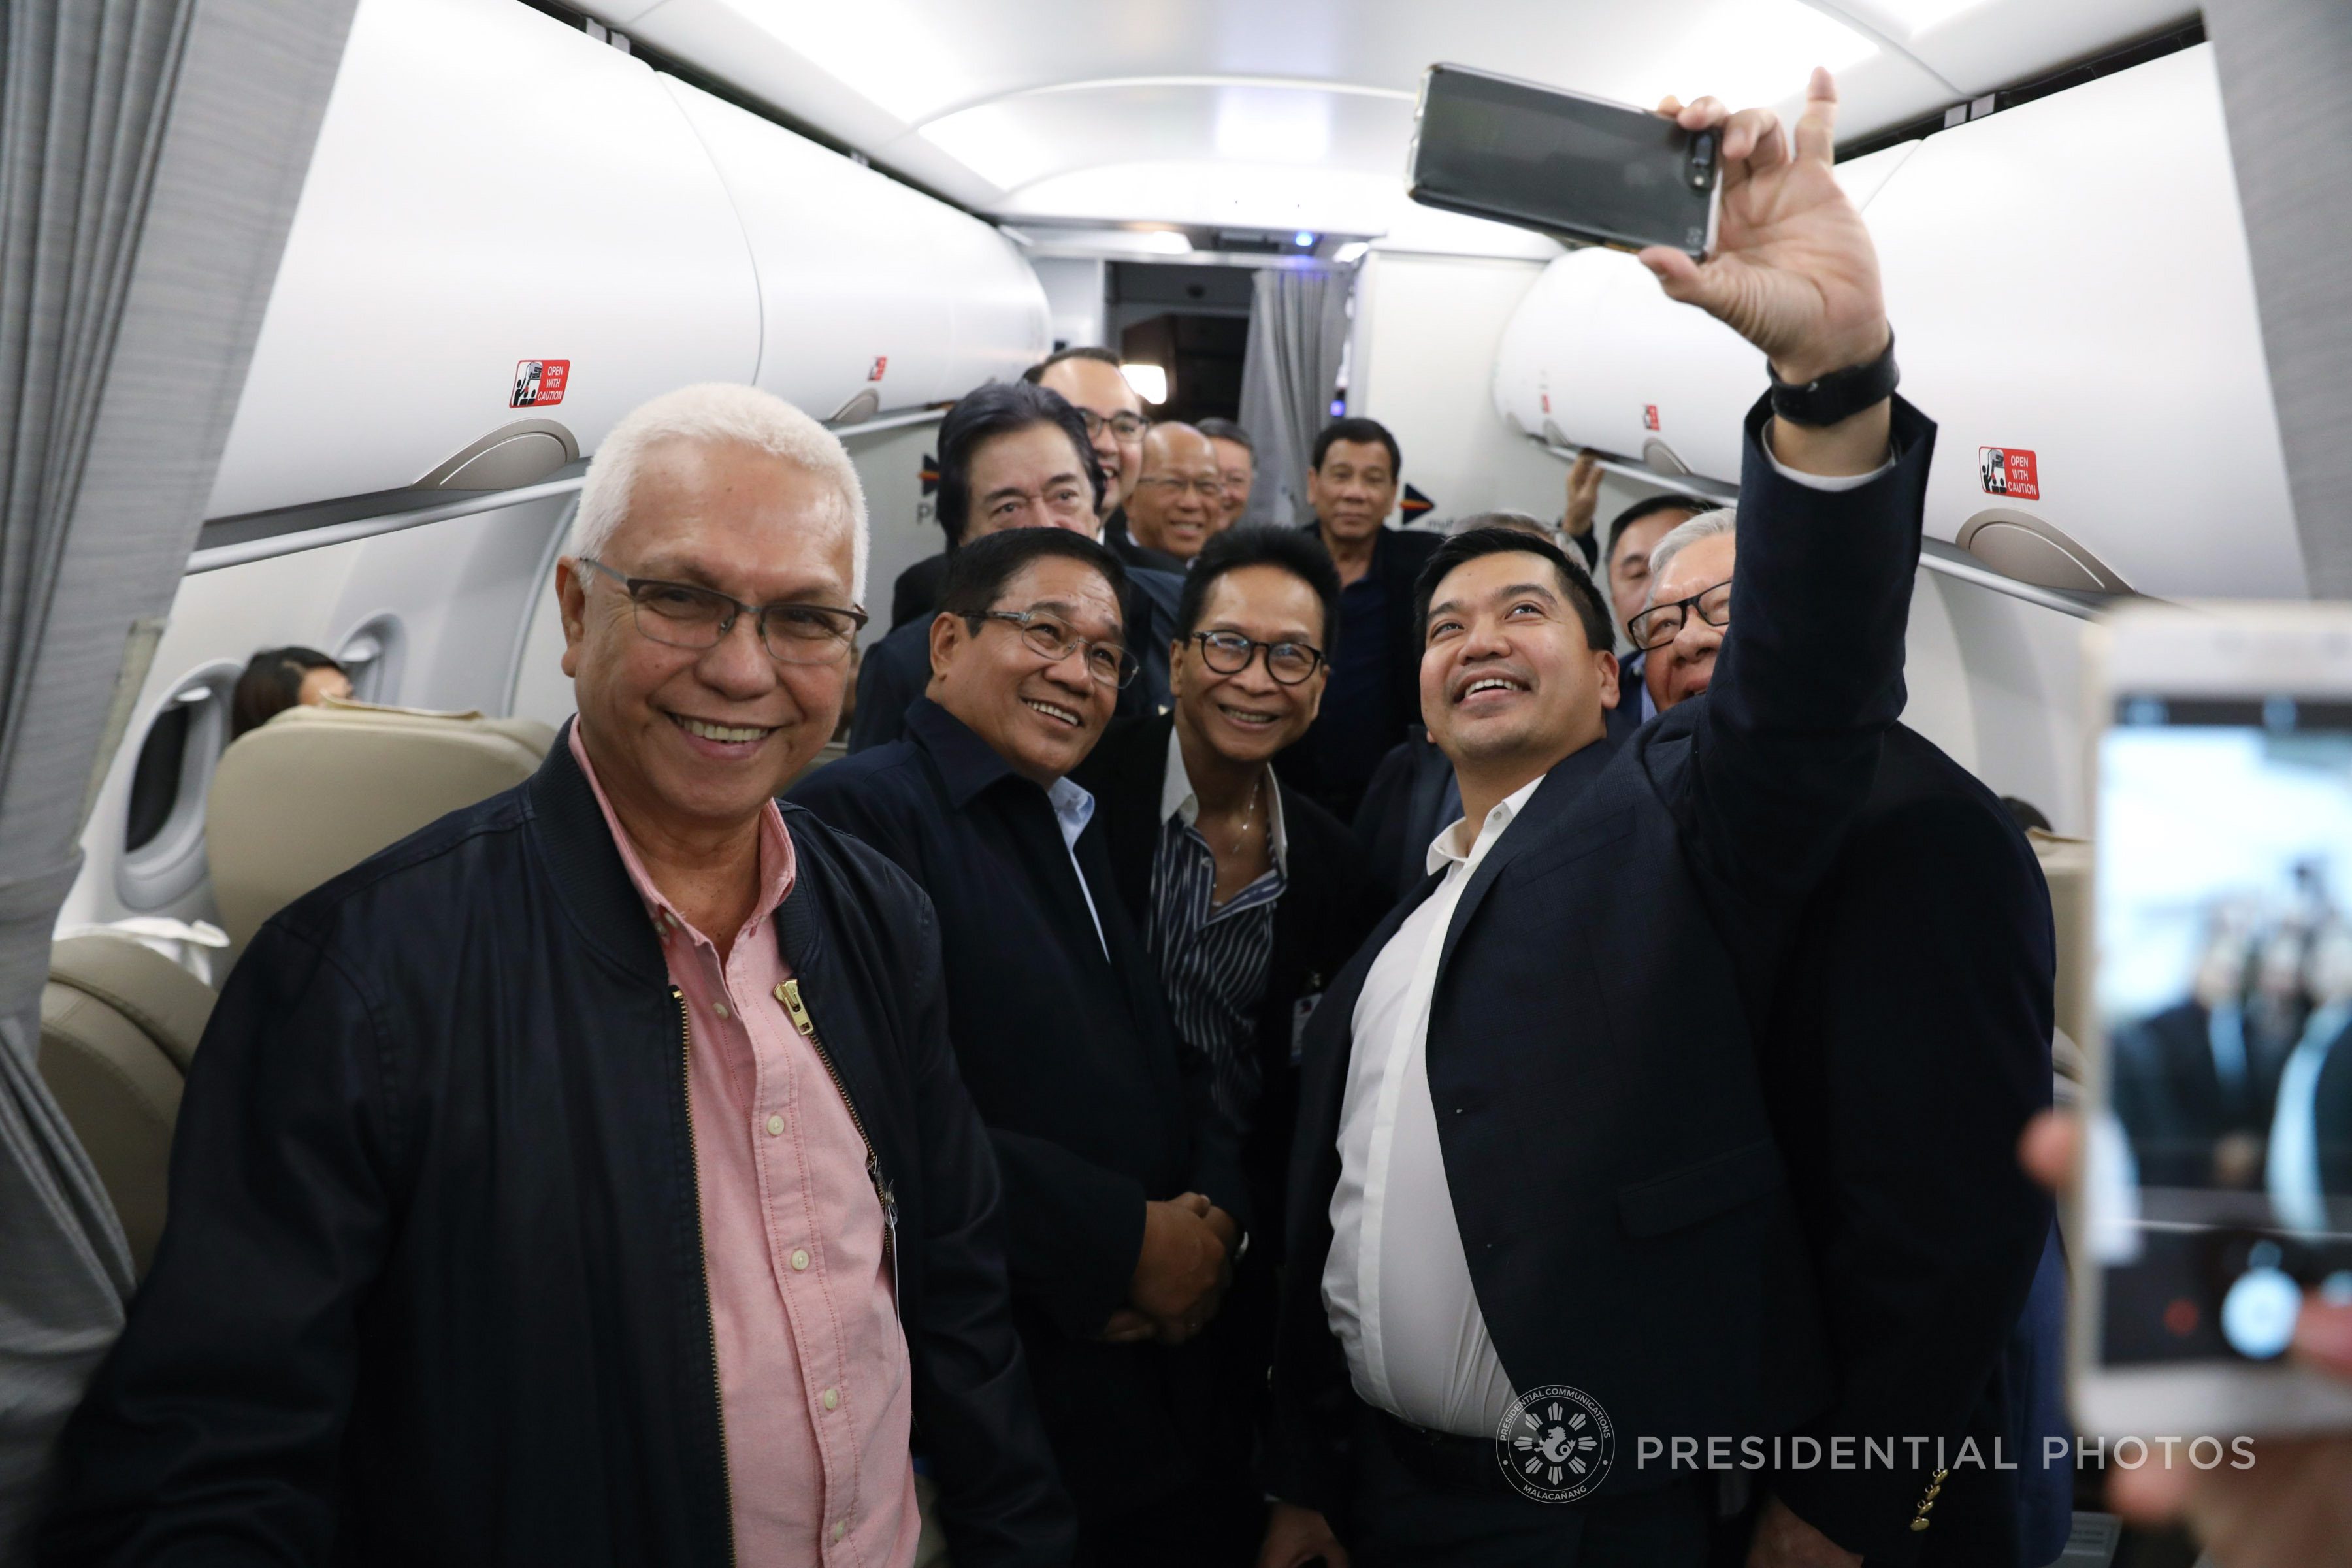 PHOTO TIME. President Duterte poses for a selfie with the members of his delegation before he disembarks from the Philippine Airlines chartered flight upon his arrival at the Haneda Airport. Presidential photo 